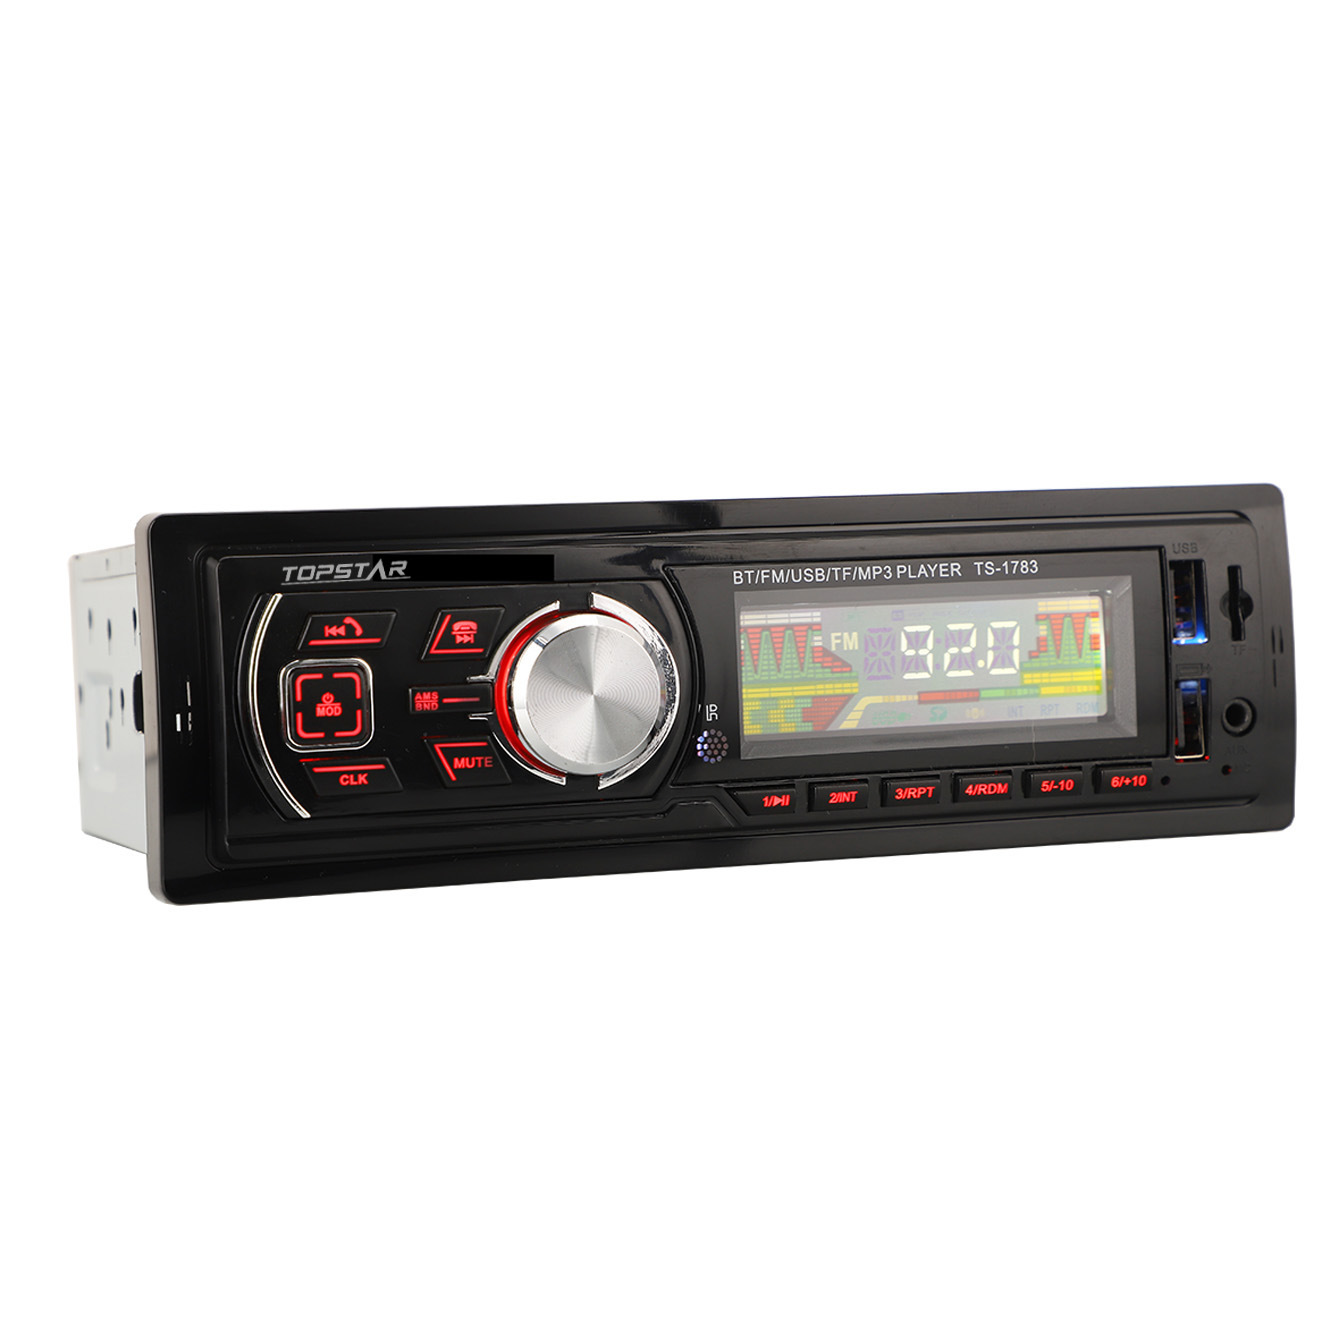 Car LCD Player FM Transmitter Audio One DIN MP3 Player Fixed Panel MP3 Car USB Player Single DIN Fixed Panel Car Player